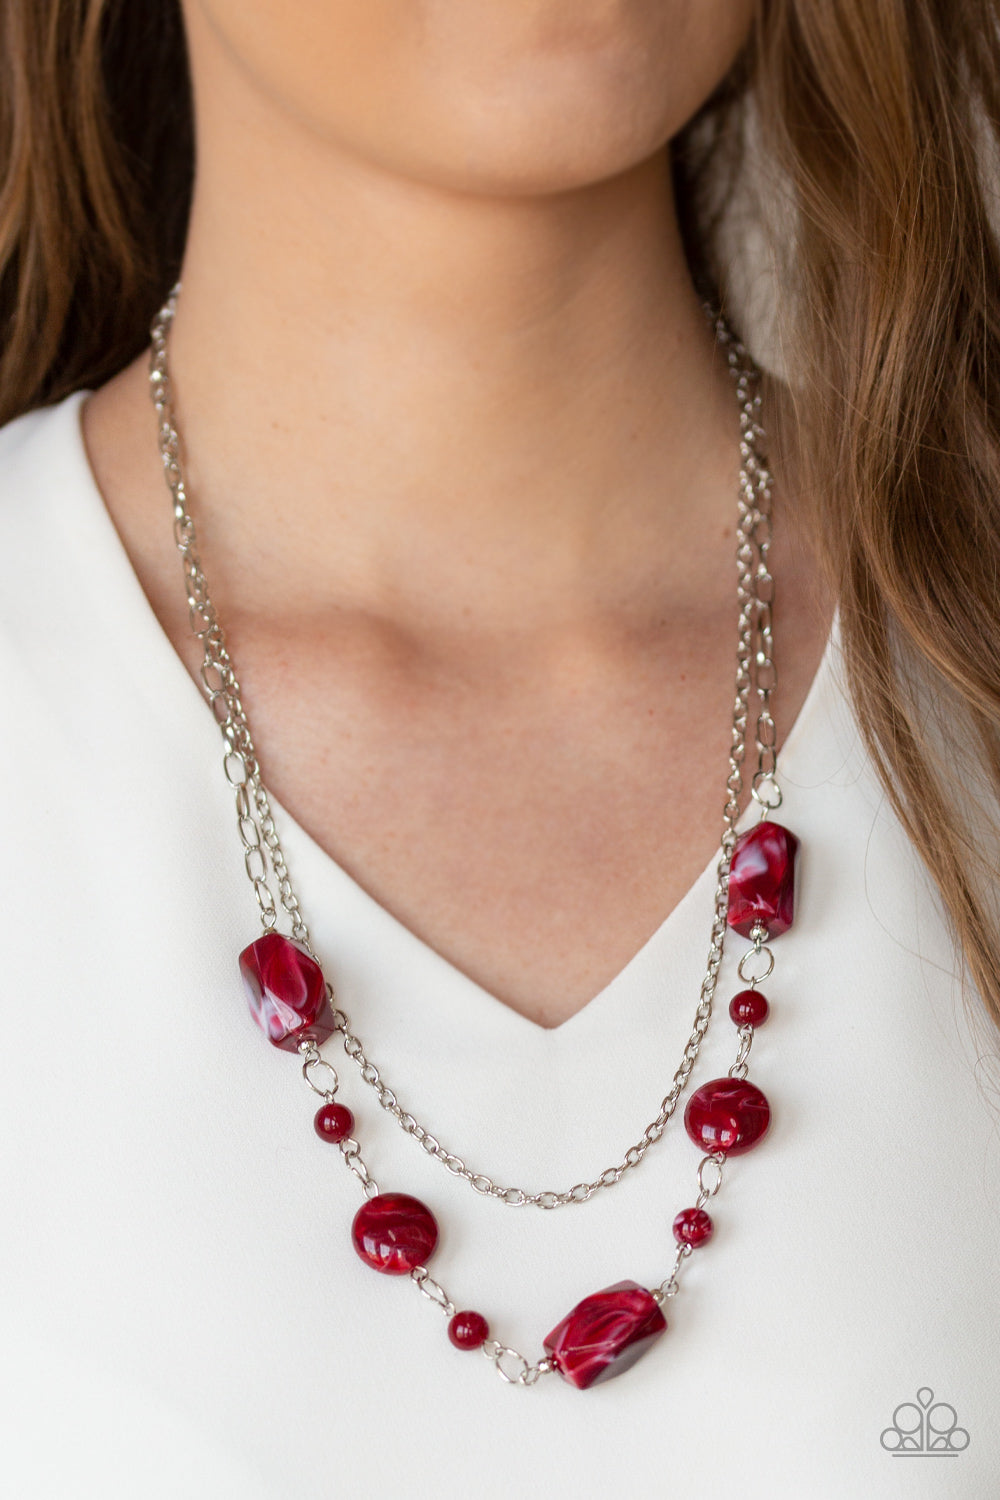 Colorfully Cosmopolitan - Red necklace